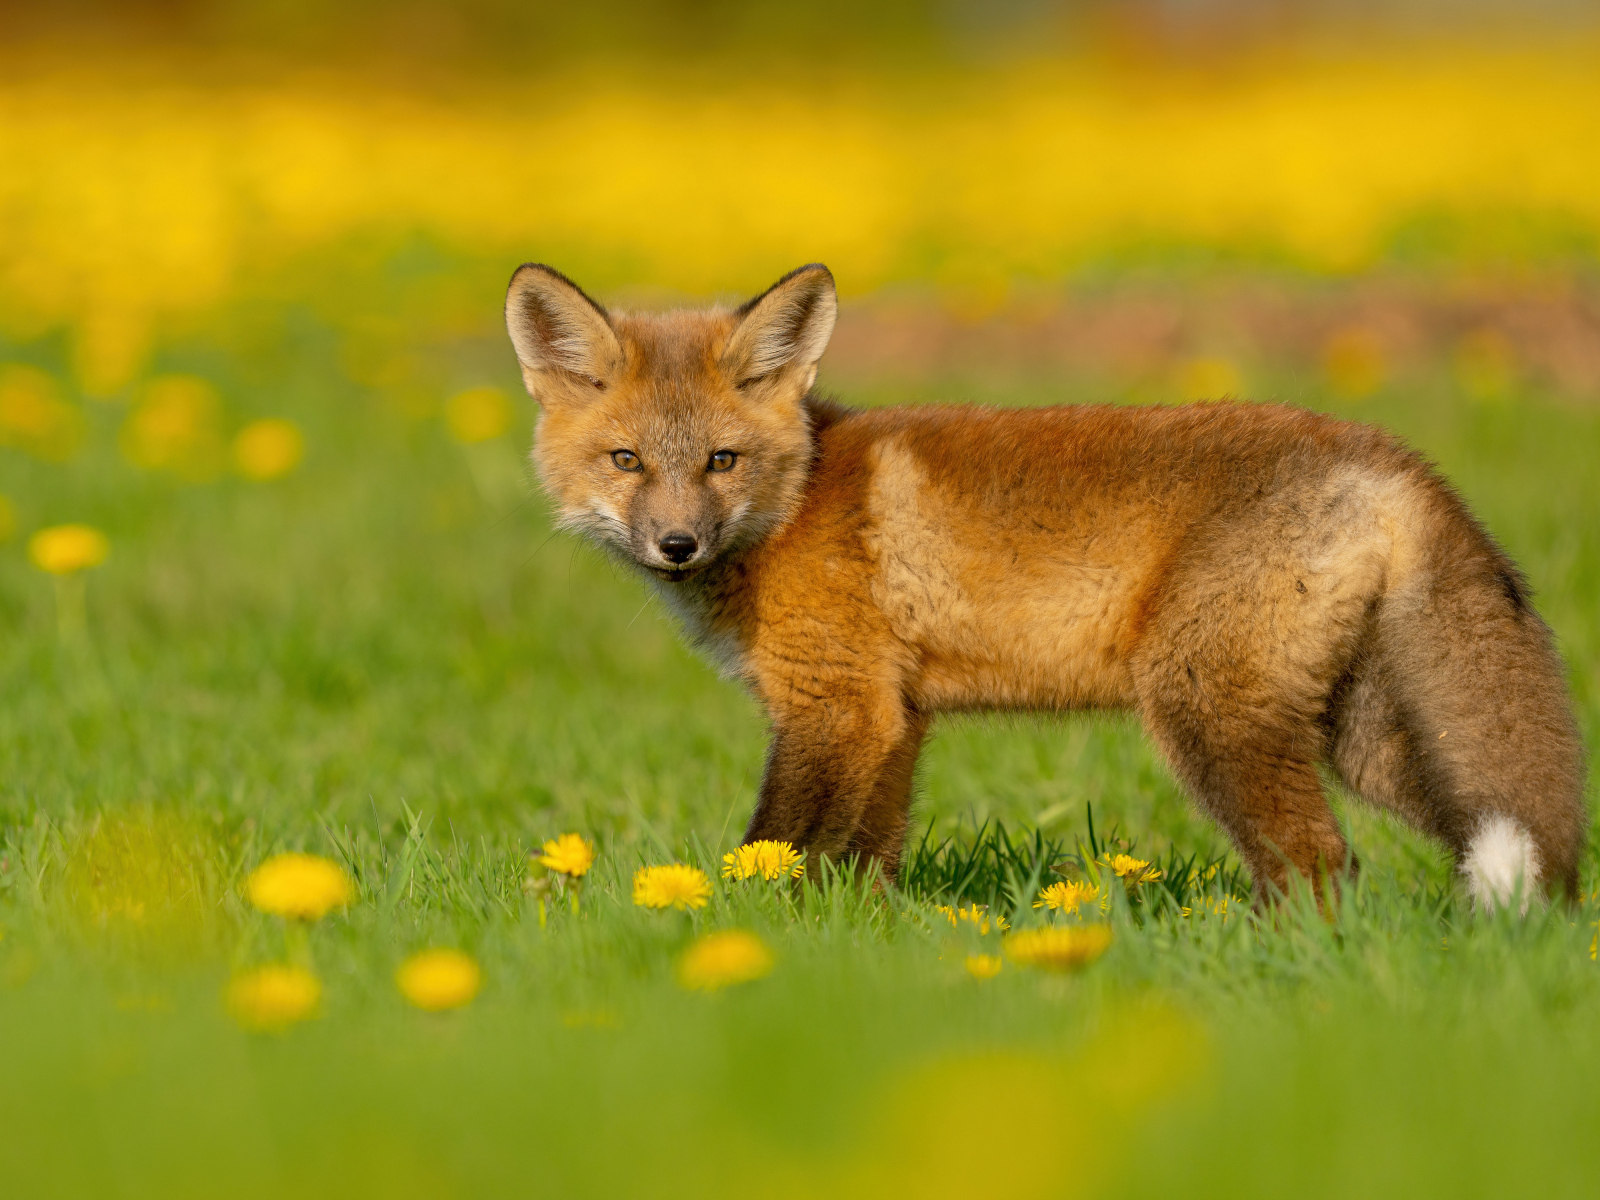 Little fox on the grass with dandelions